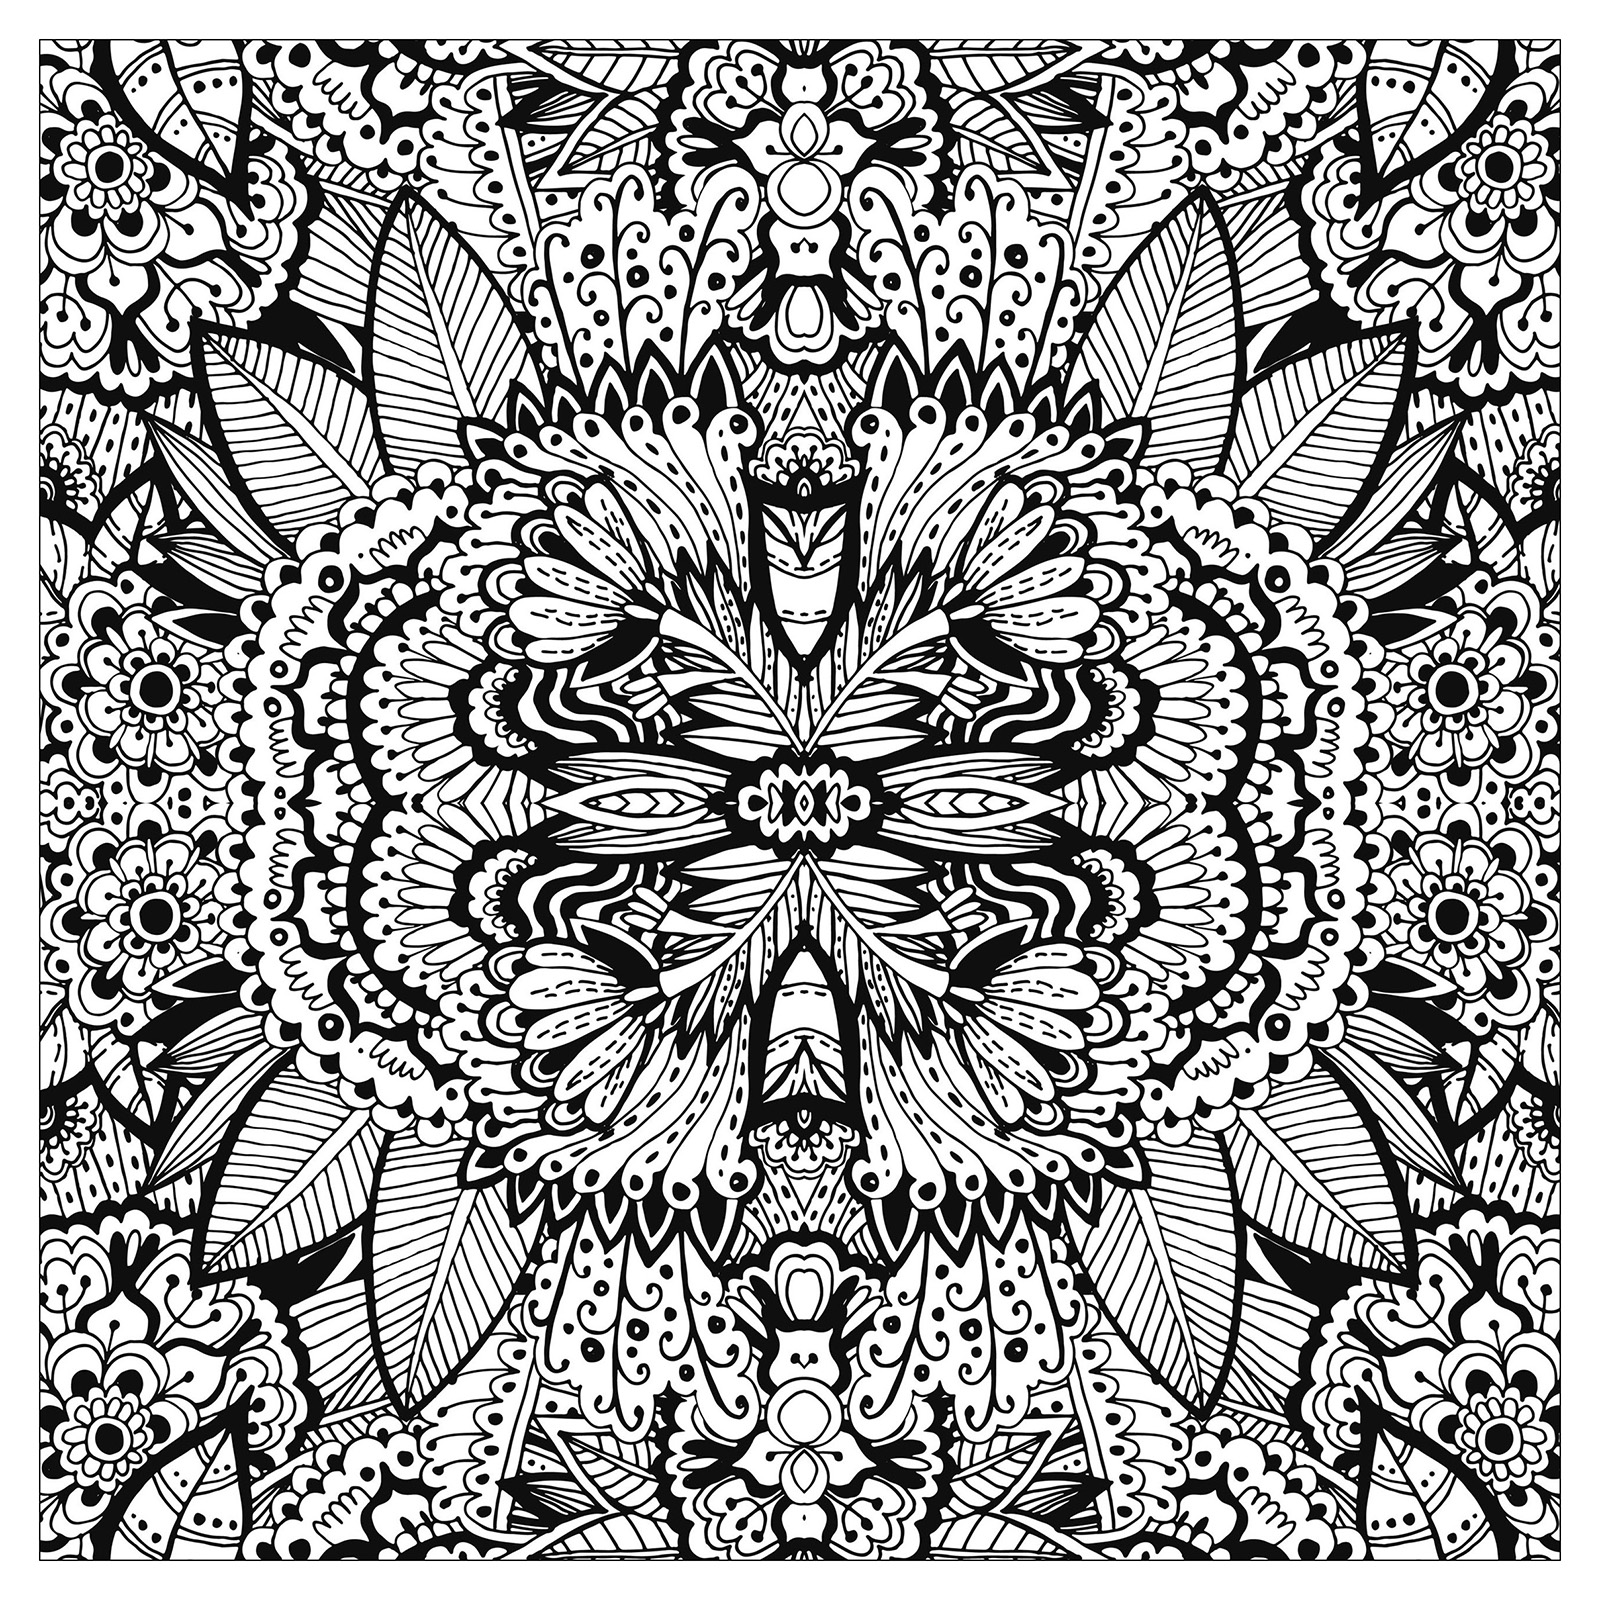 'Flower carpet' : A very very complex coloring page !, Artist : Valeriia Lelanina